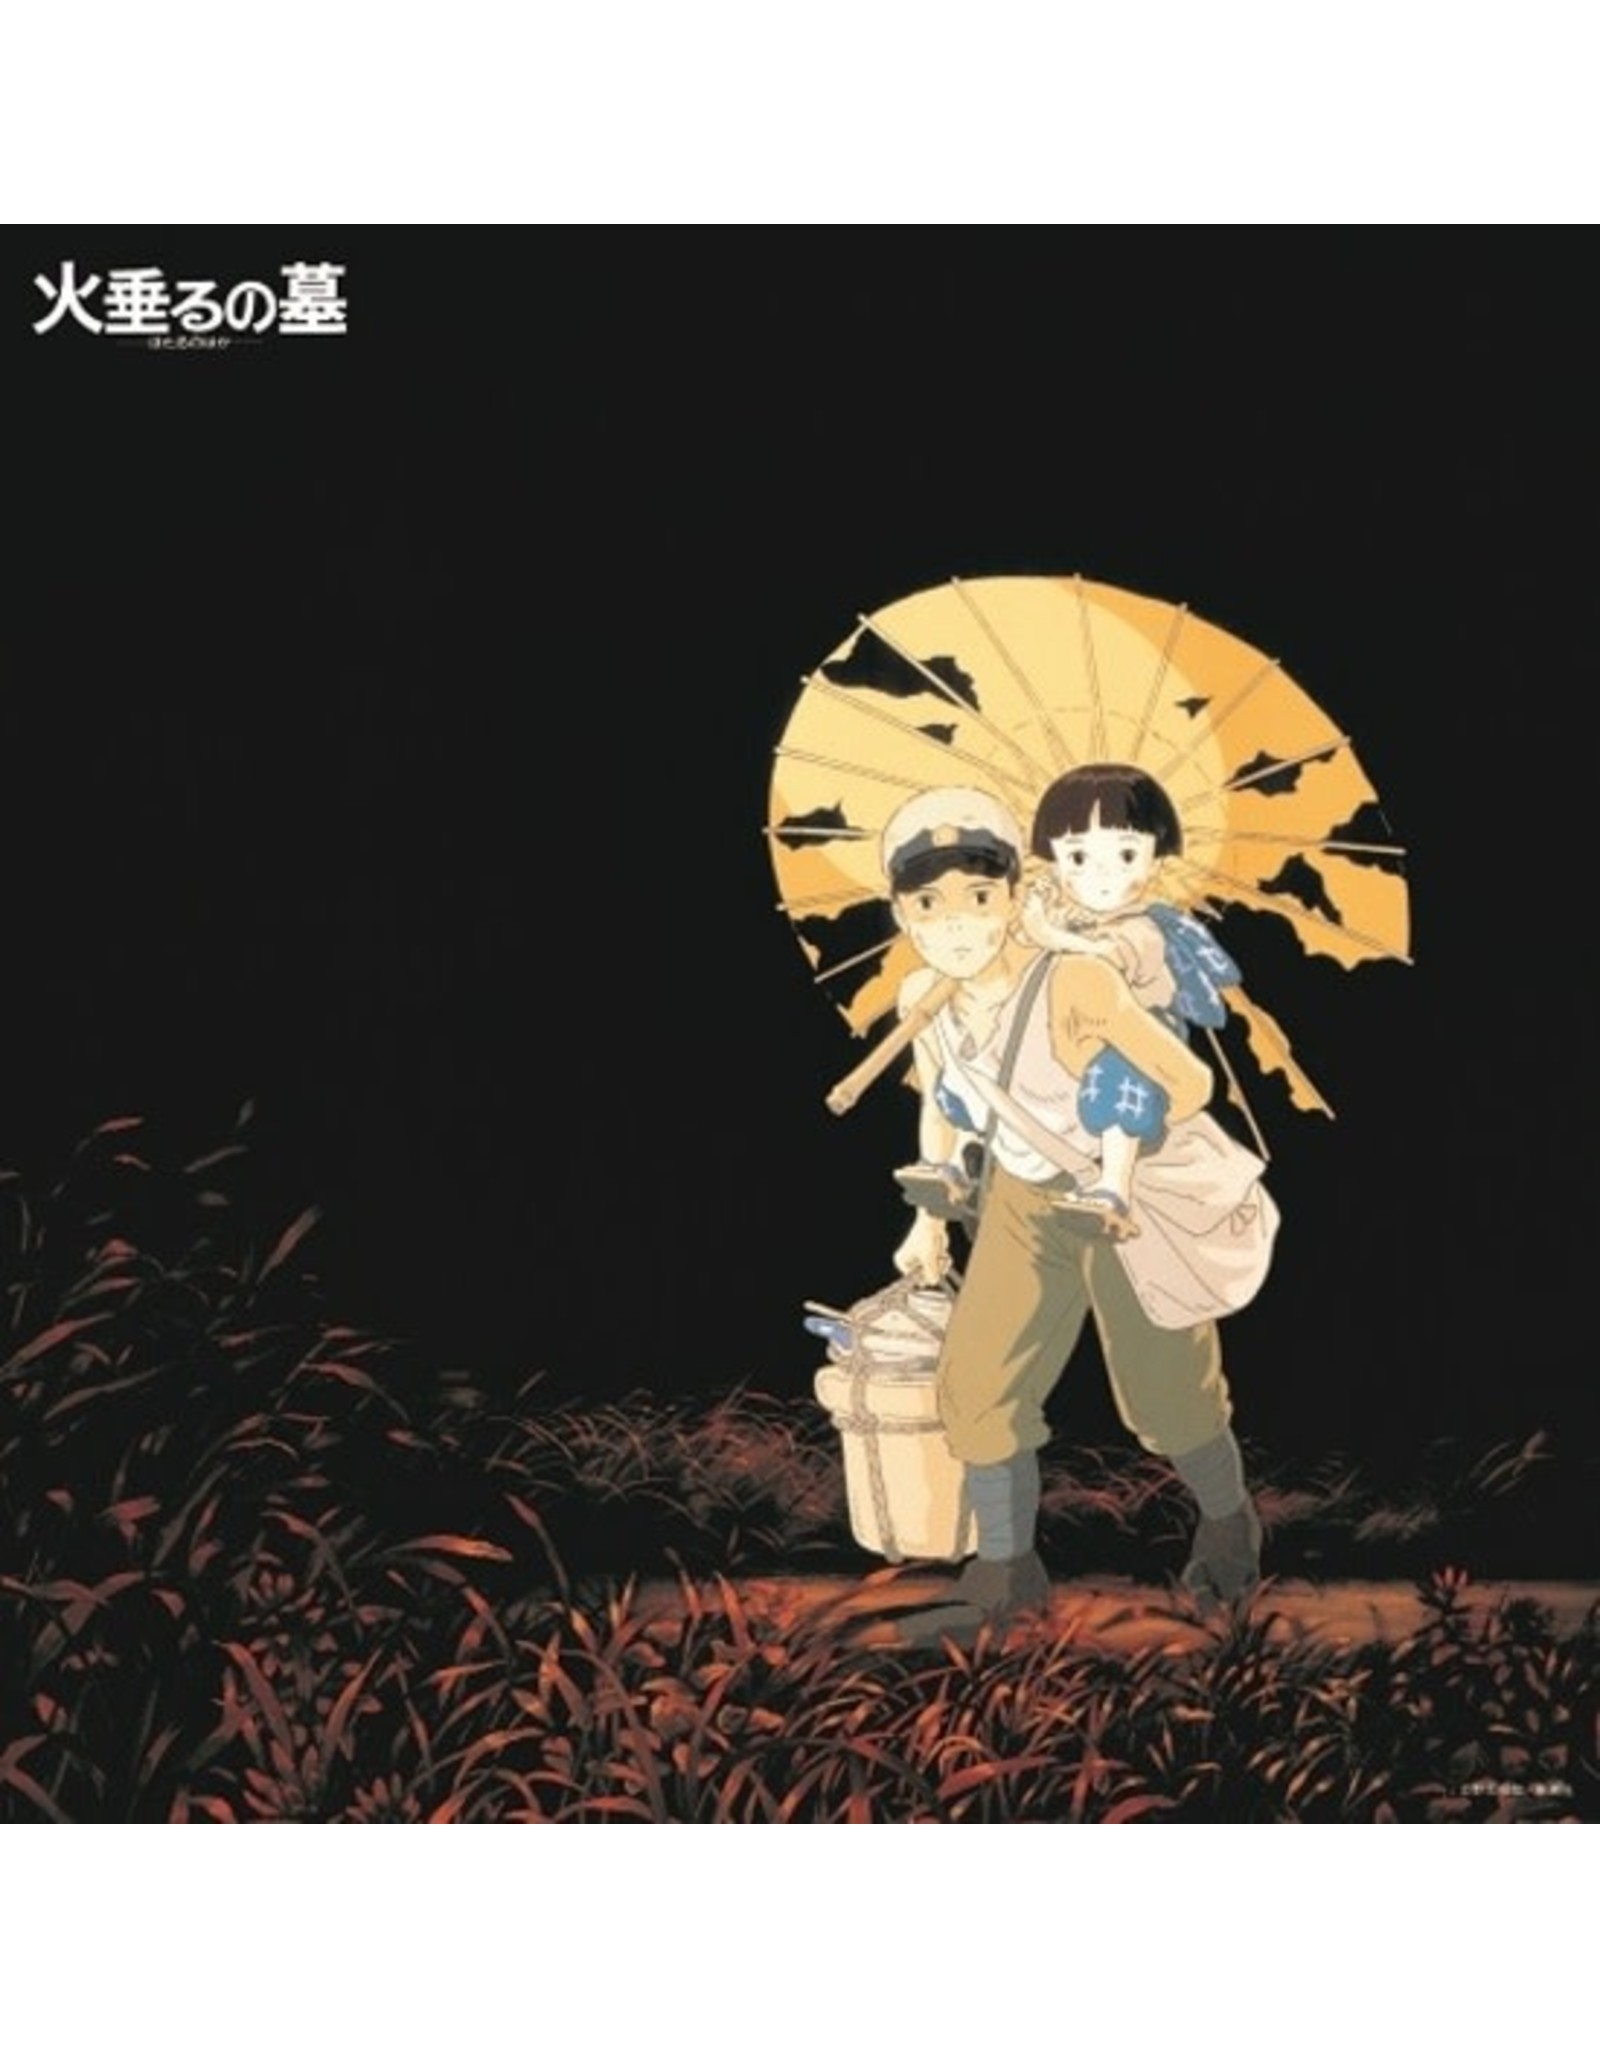 Grave of the Fireflies Studio Ghibli Anime Picture Book Japan | eBay